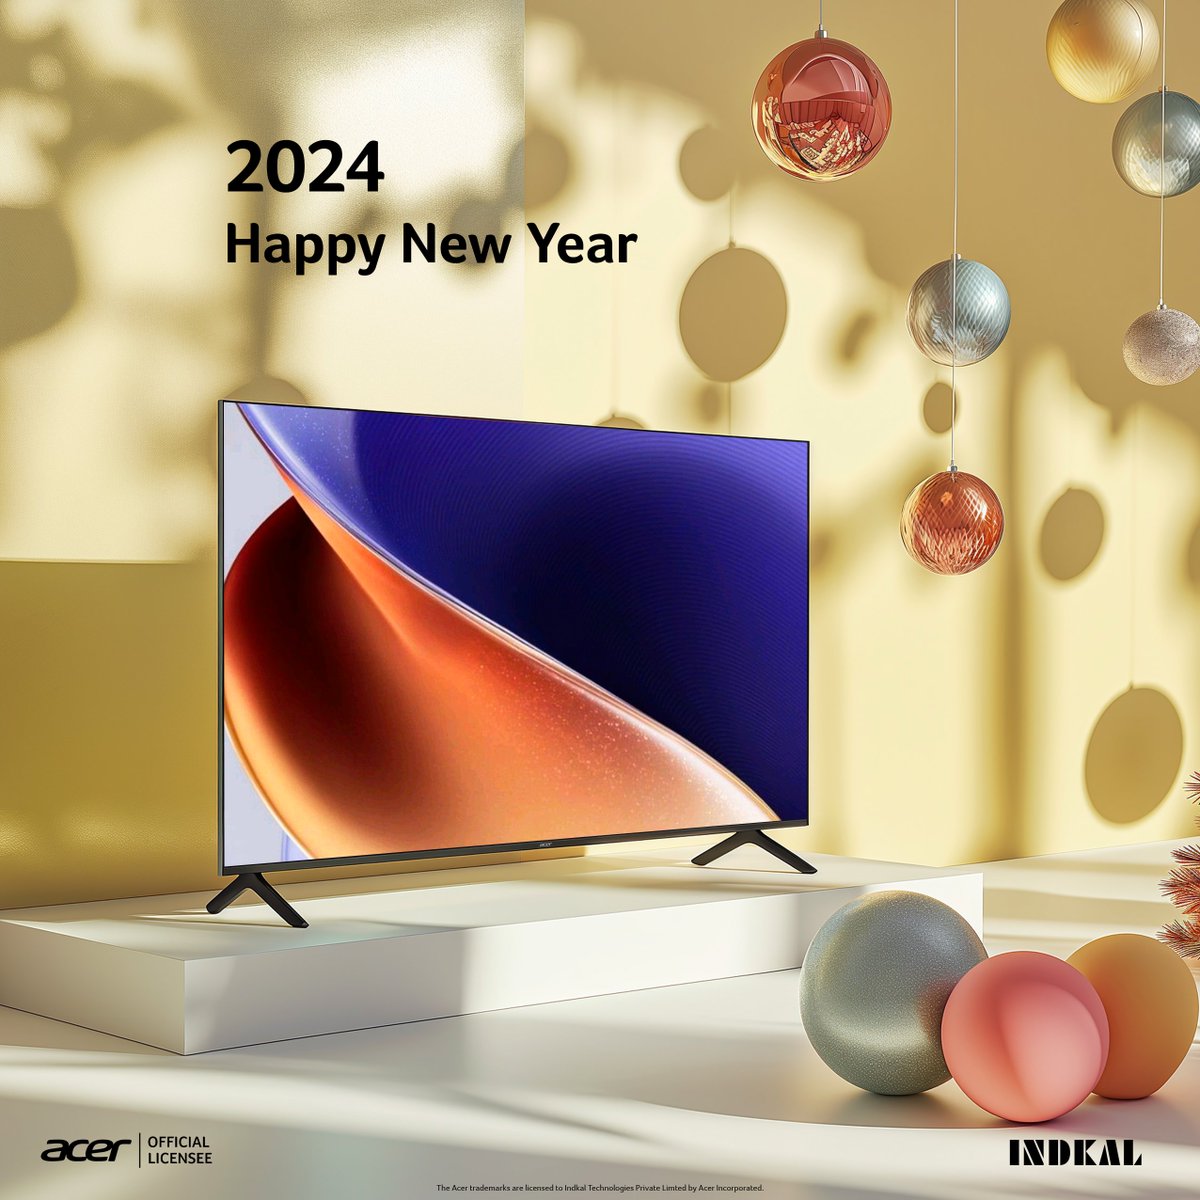 As the clock strikes midnight, we embark on a journey into a #NewYear filled with hope, harmony, and happiness. Wishing you a 2024 where technology connects us, dreams thrive, and hearts overflow with joy. #HappyNewYear from our family to yours! 

#NewYear2024 #AcerTelevisions